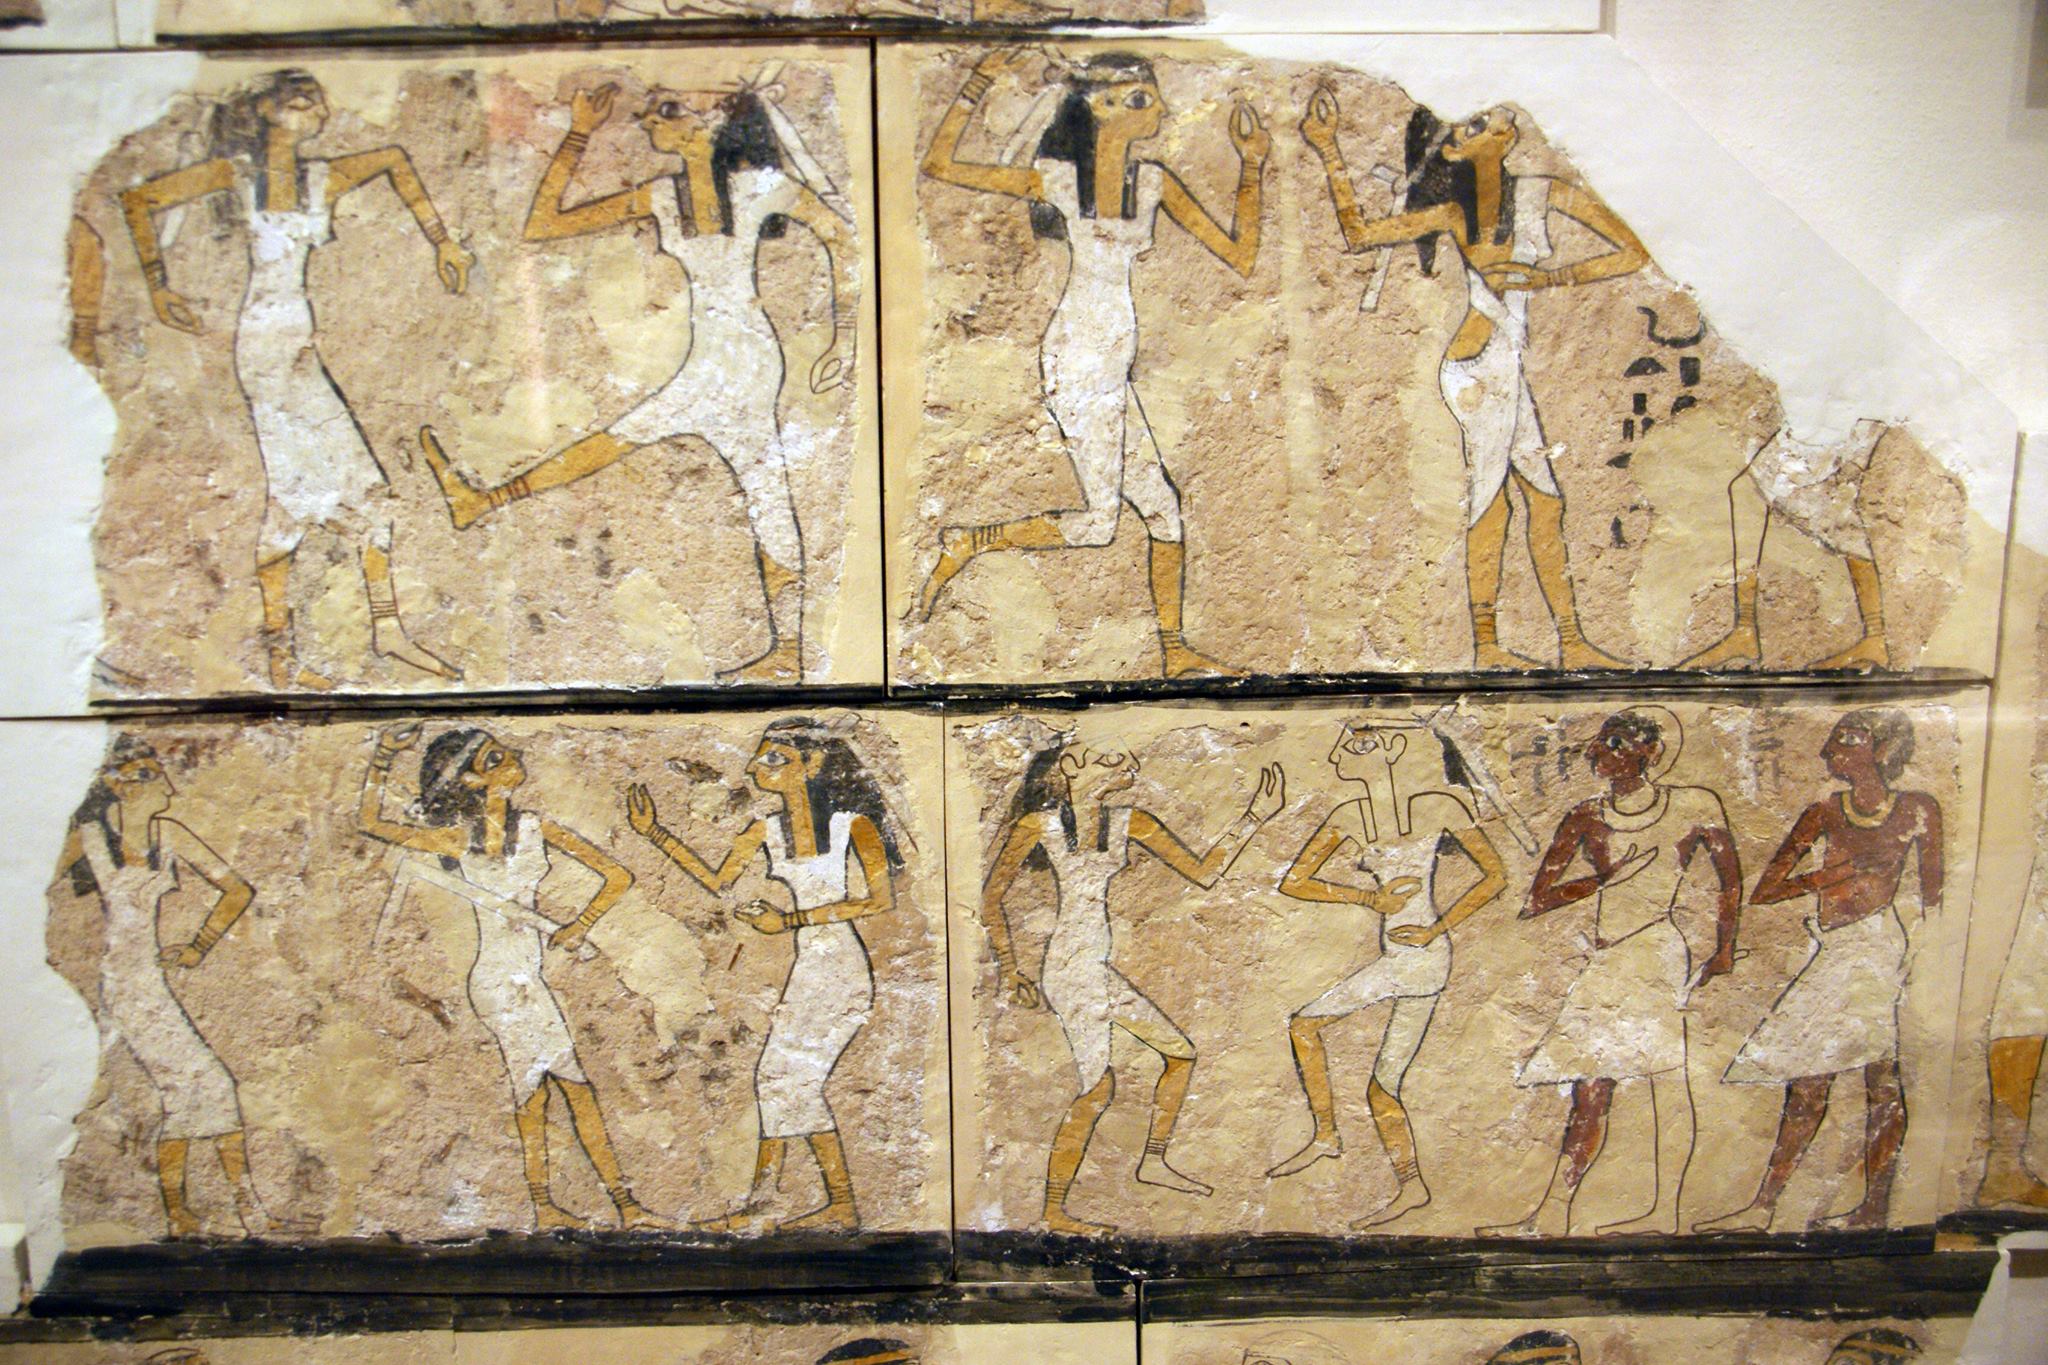 A wall painting from the Tomb of the Dancers in Thebes, Egypt. Ca. 1630-1540 BCE, now housed at the Ashmolean Museum in Oxford.jpg